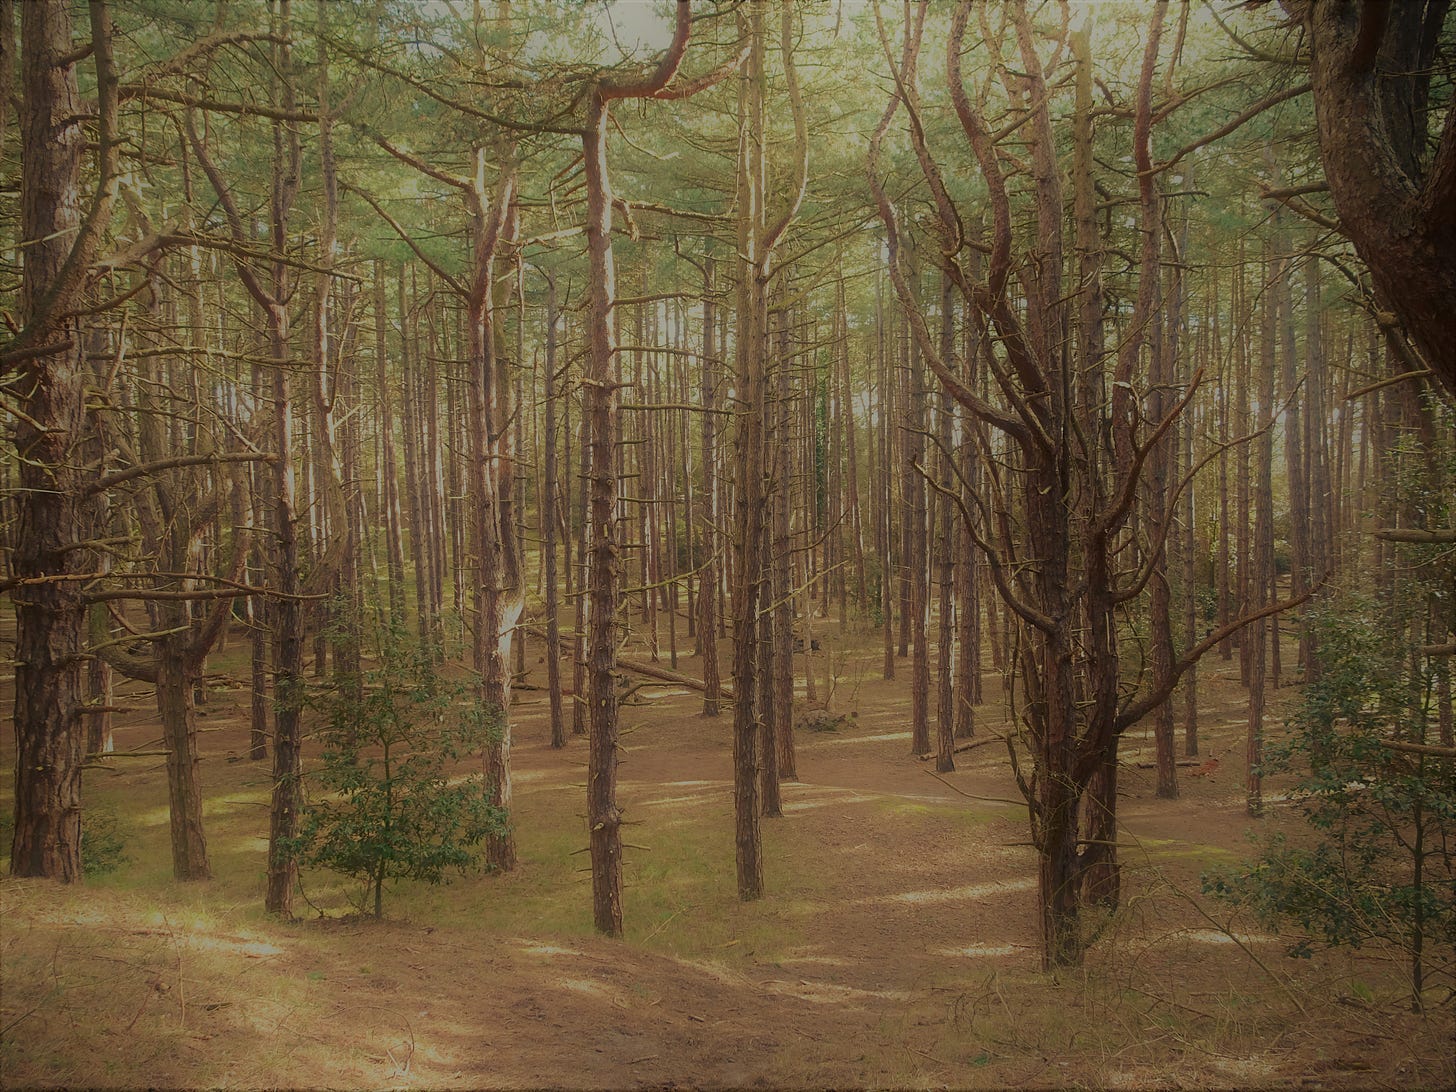 A stand of pine trees growing in needle-strewn, sandy soil, their barrenness  softened by a light sea mist.